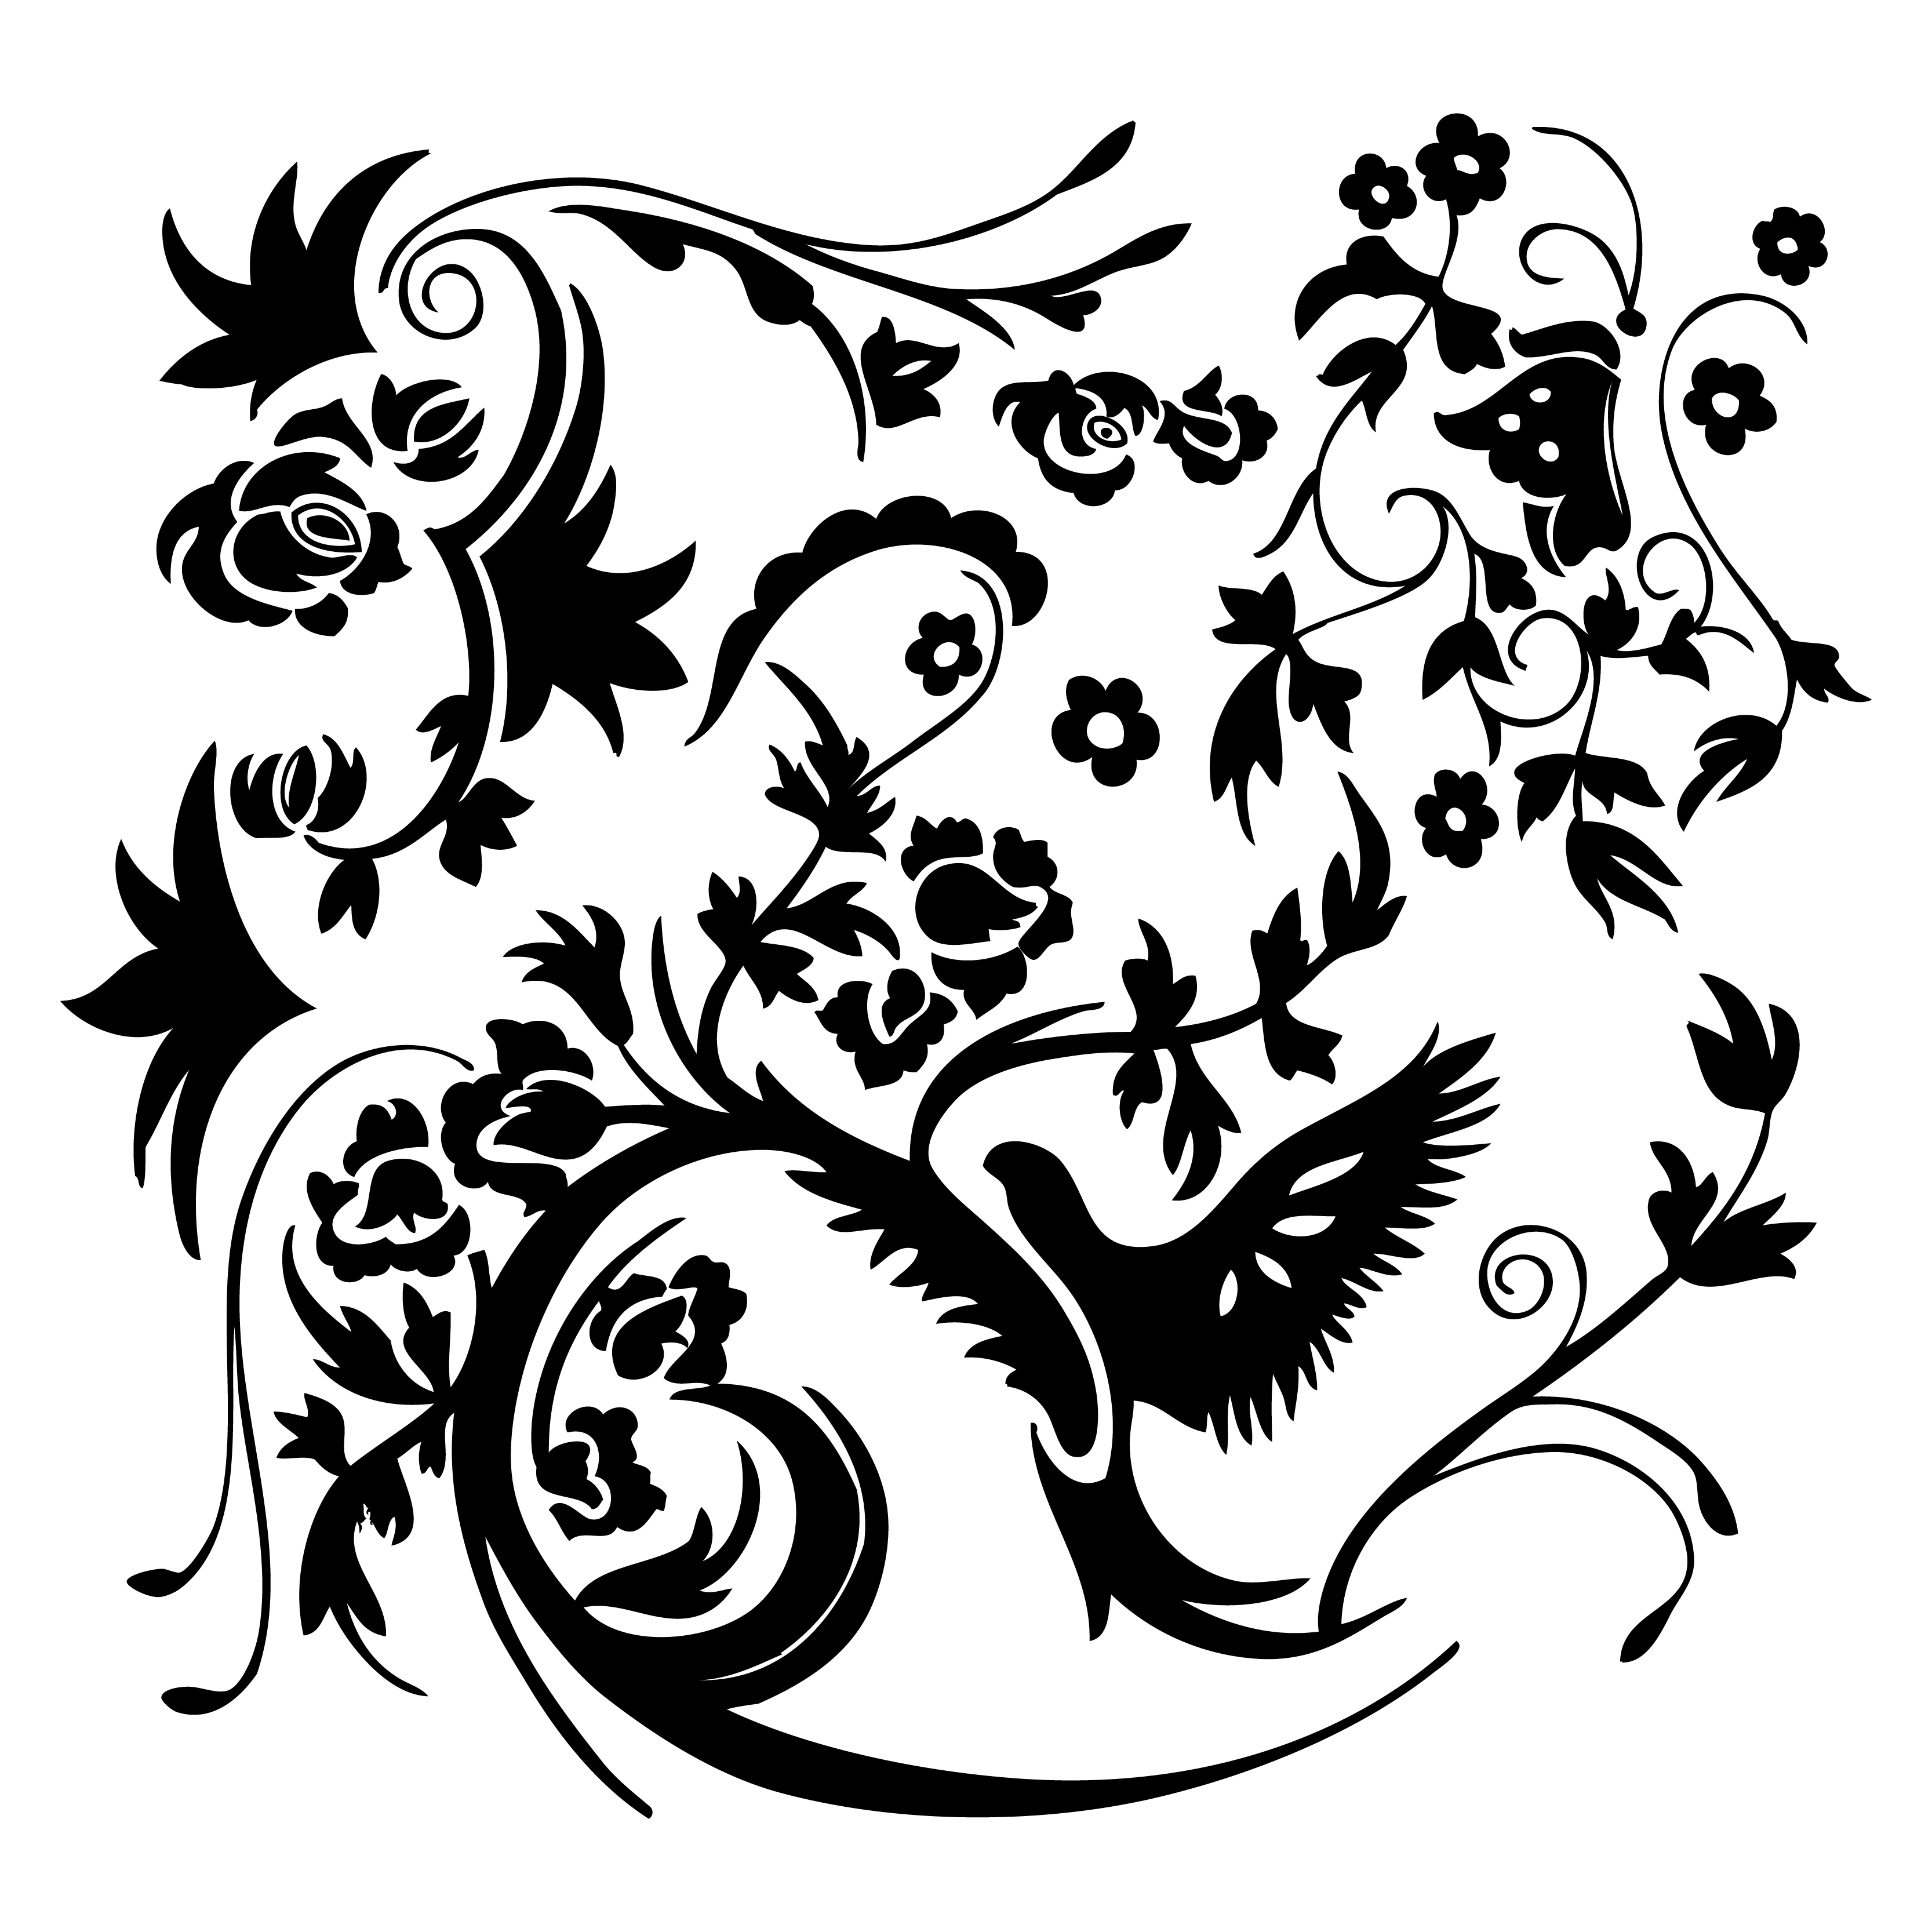 Free Hand Drawn Floral Vector Image